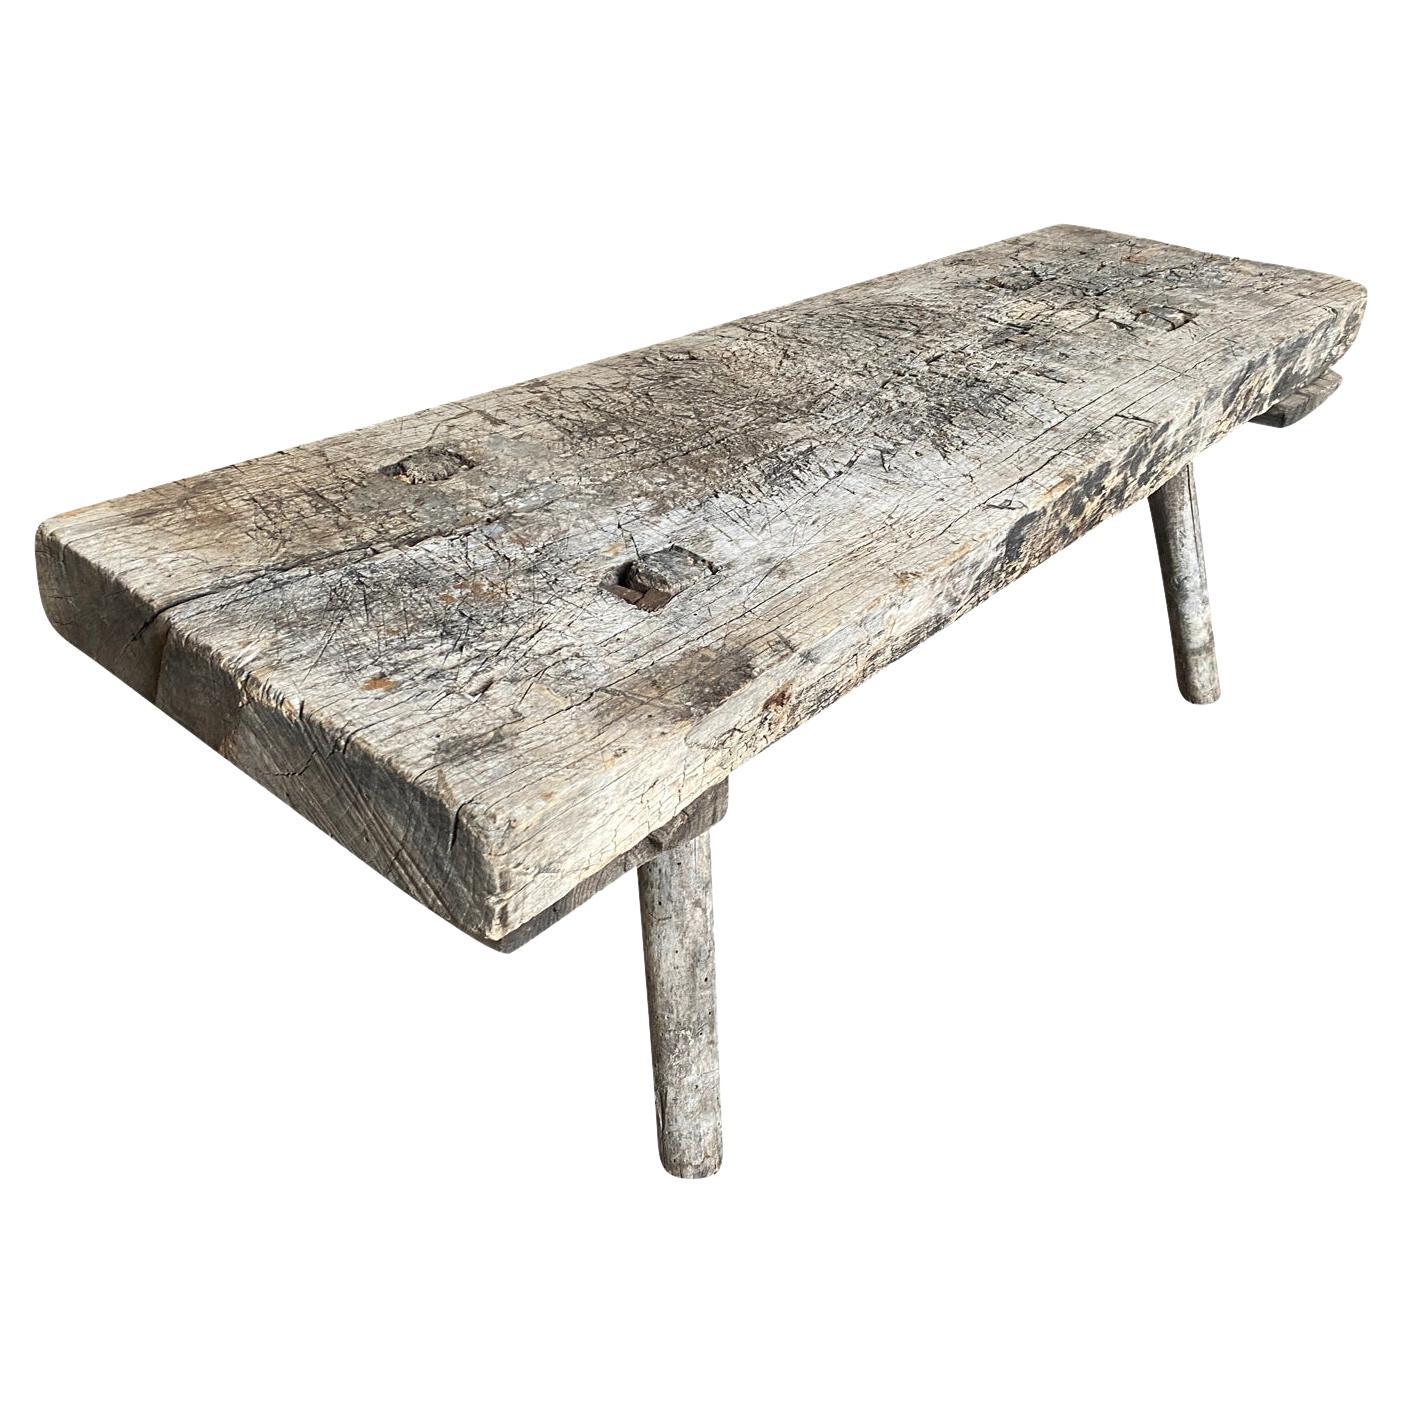 A primitive 18th century Bench - Coffee Table from the Catalan region of Spain.  Soundly constructed from naturally washed chestnut with a solid board top and slightly splayed legs.  Super patina and graining.